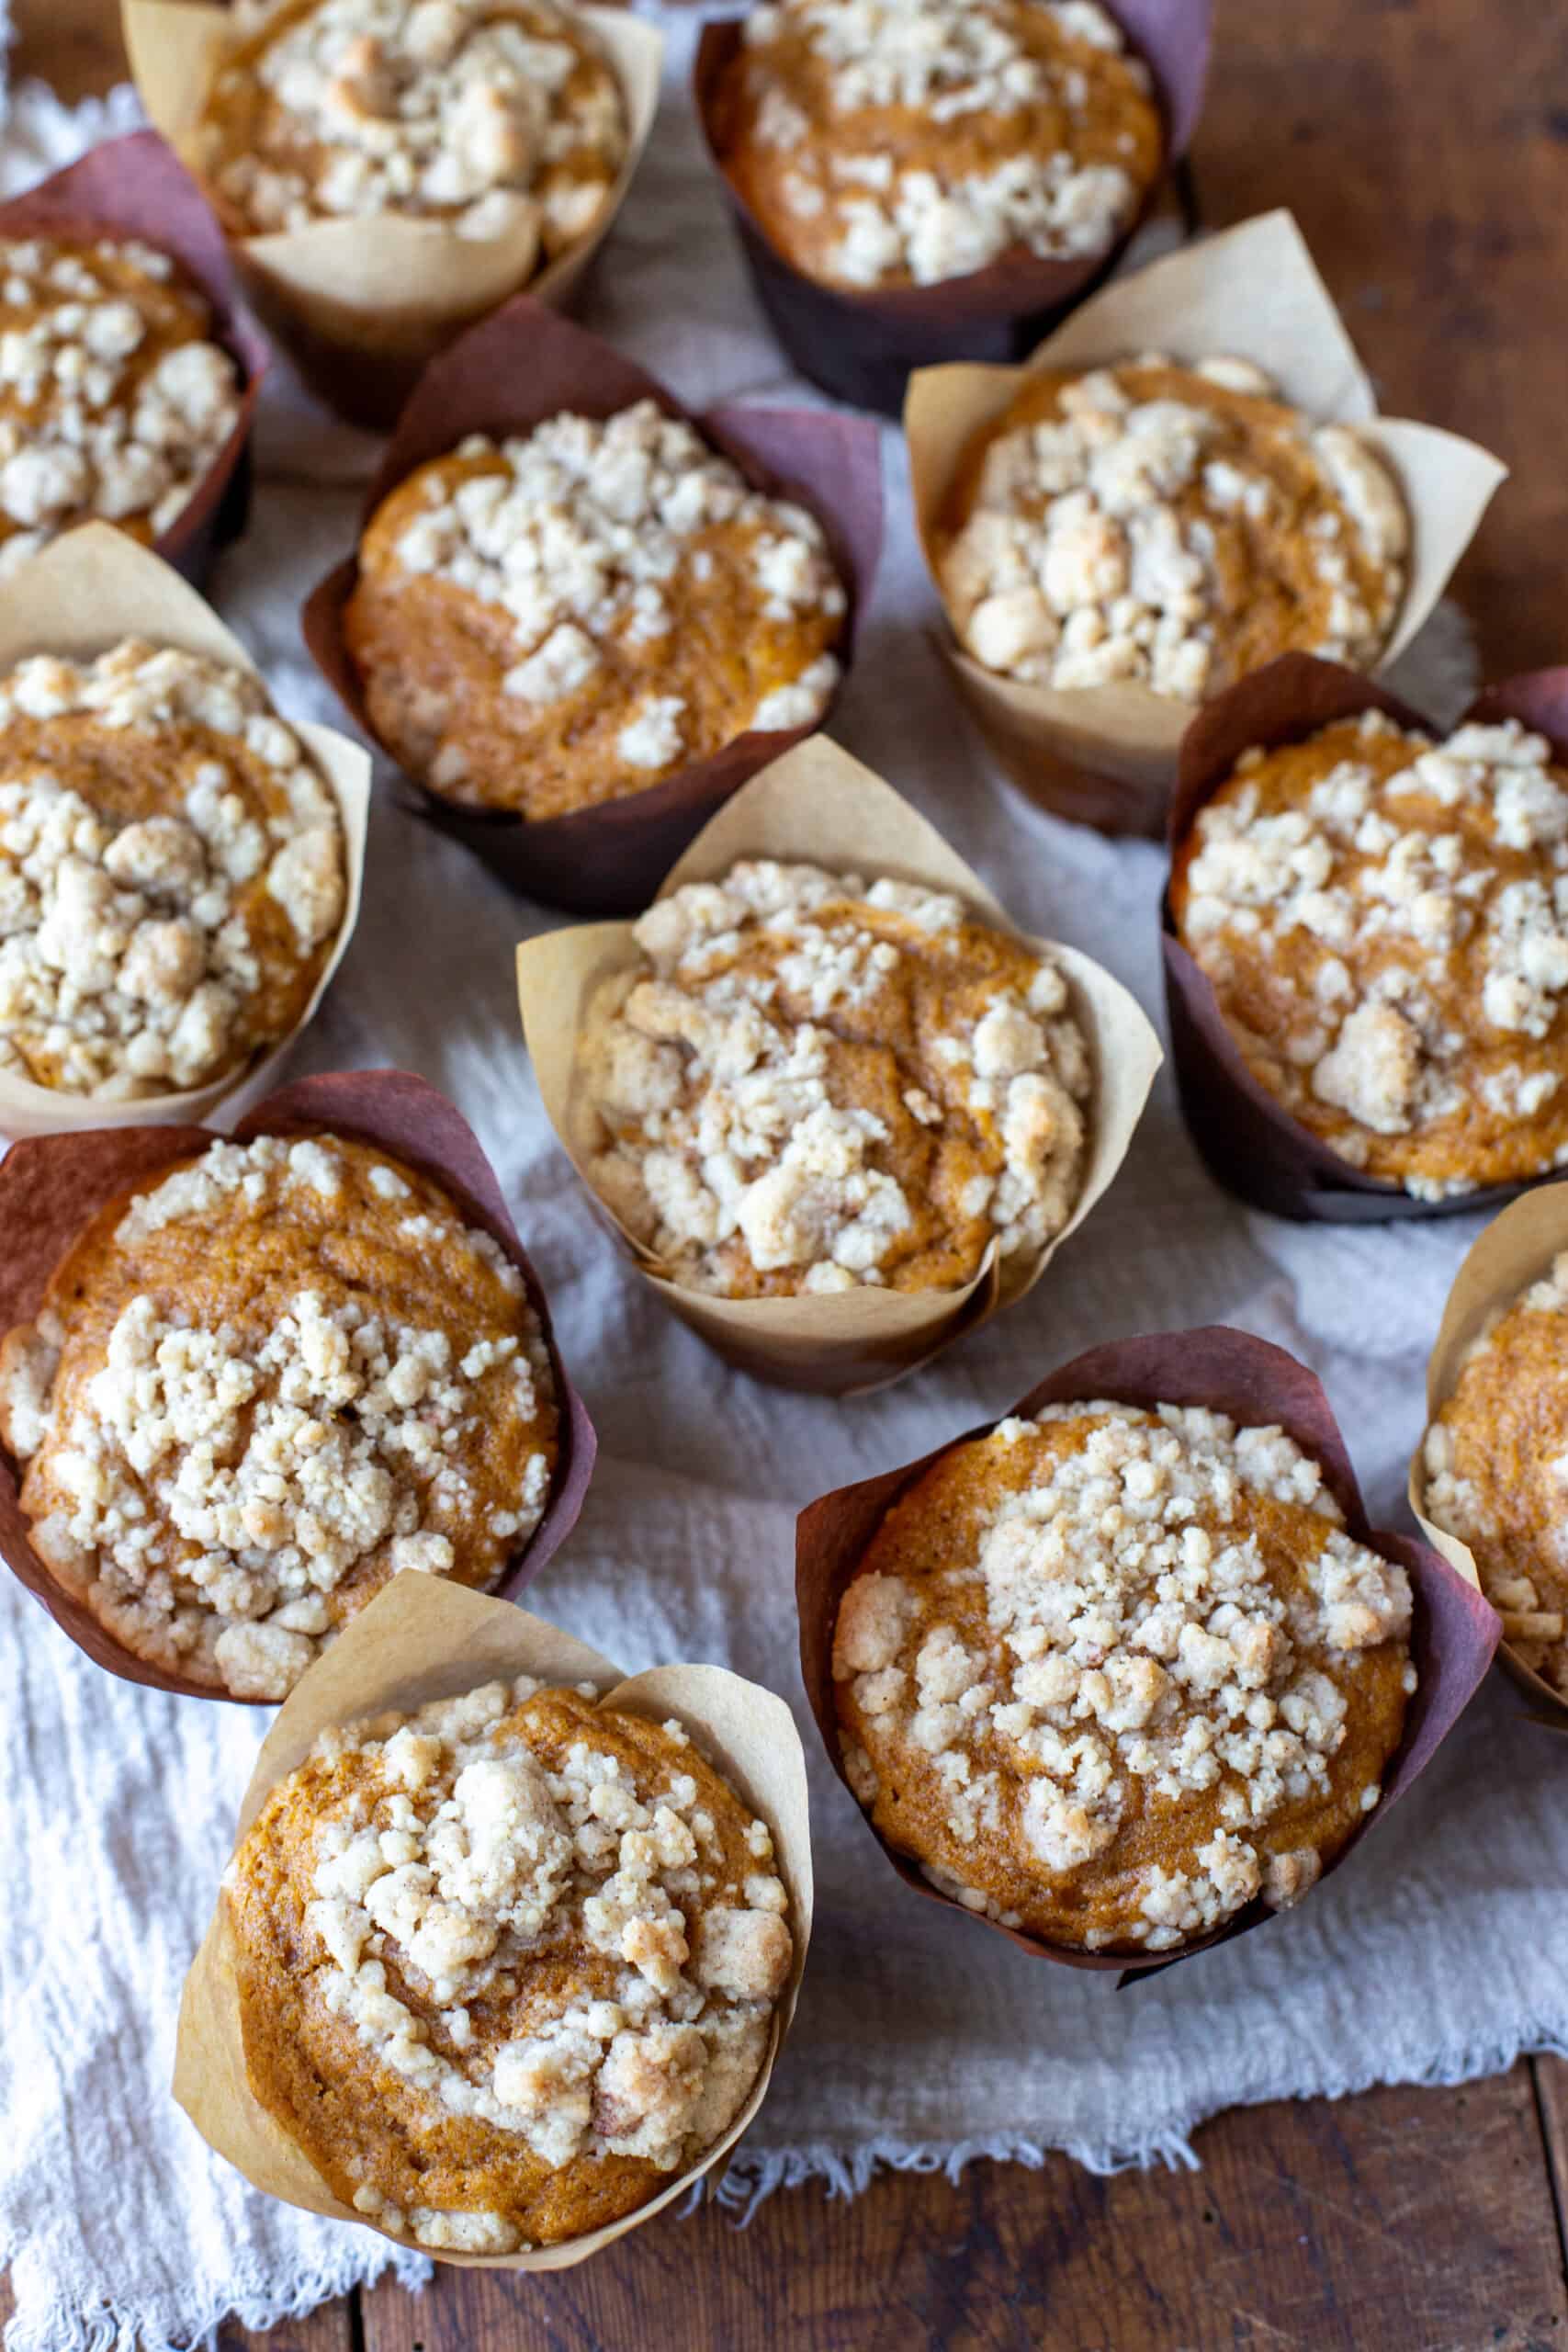 A group of pumpkin muffins on a wooden table.